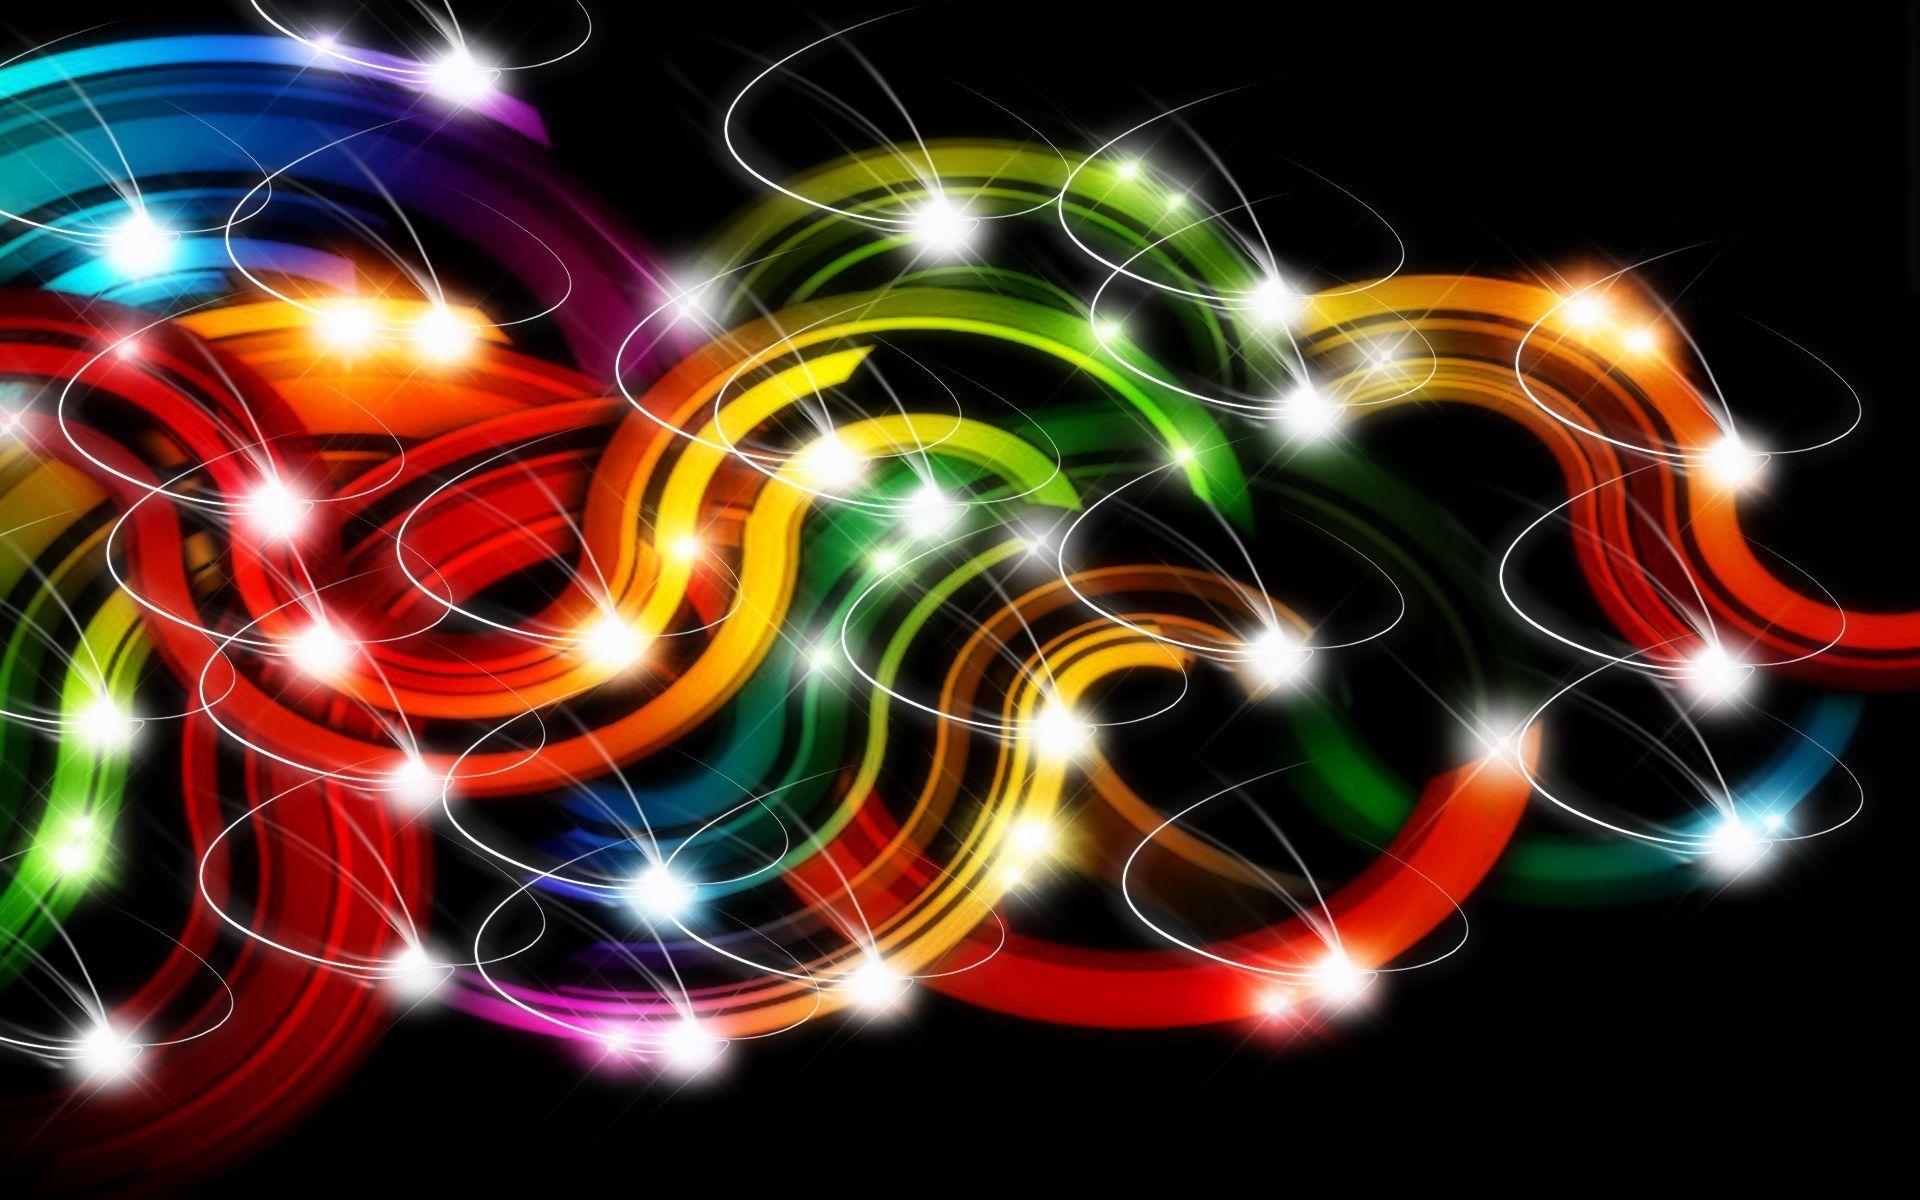 Colorful 3D Image Wallpaper High Quality Widescreen Colorfulpipes